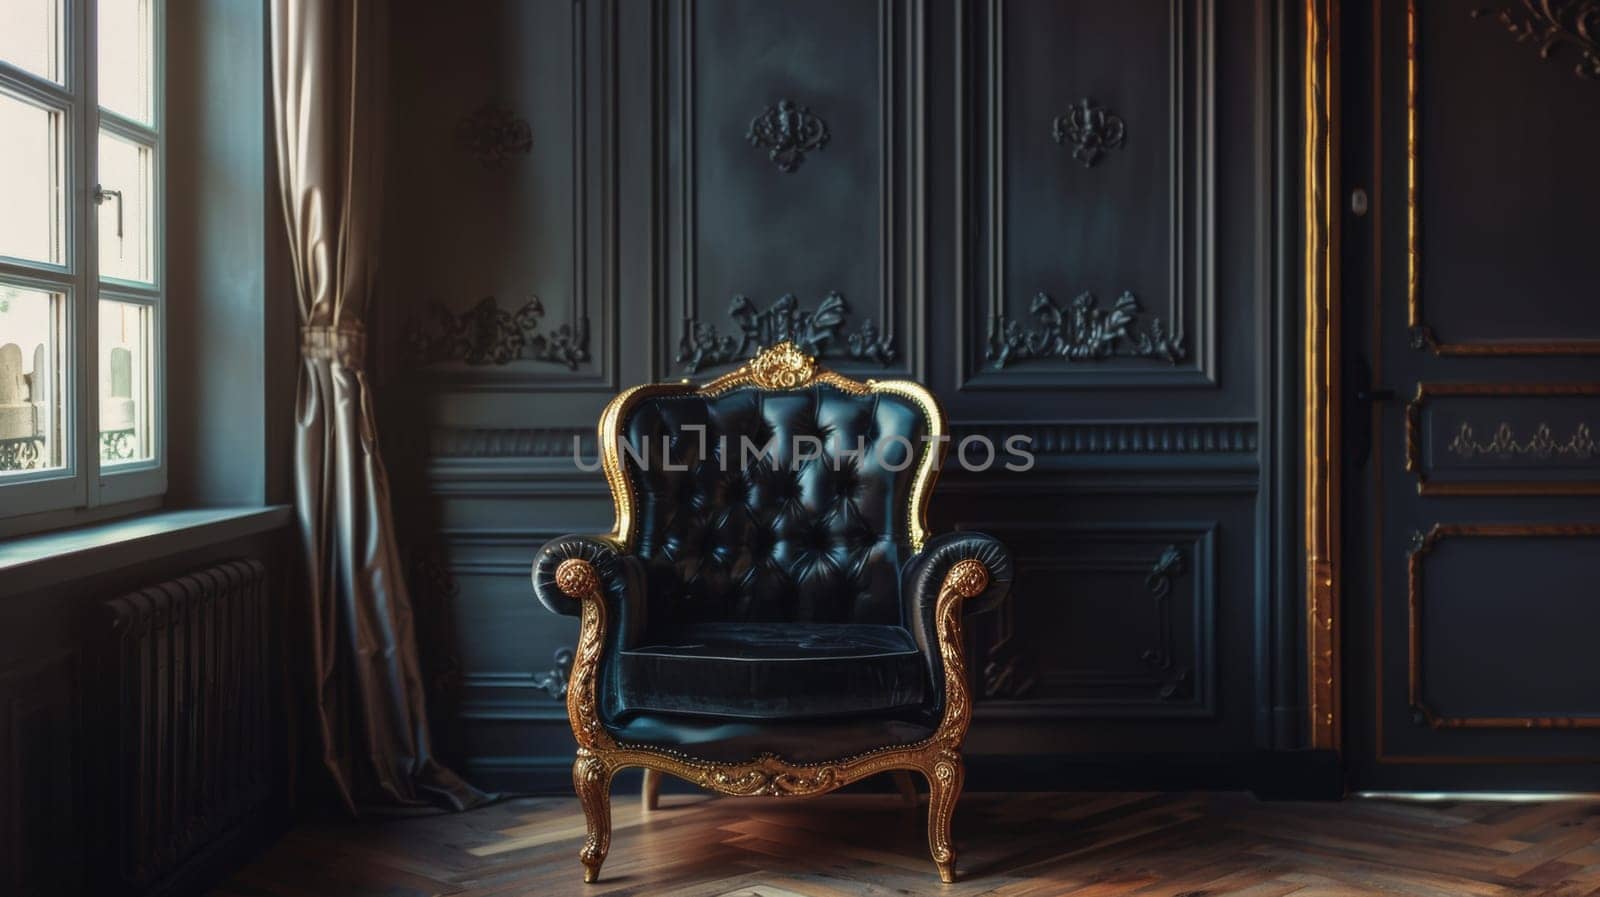 A black chair sitting in front of a window with gold trim, AI by starush